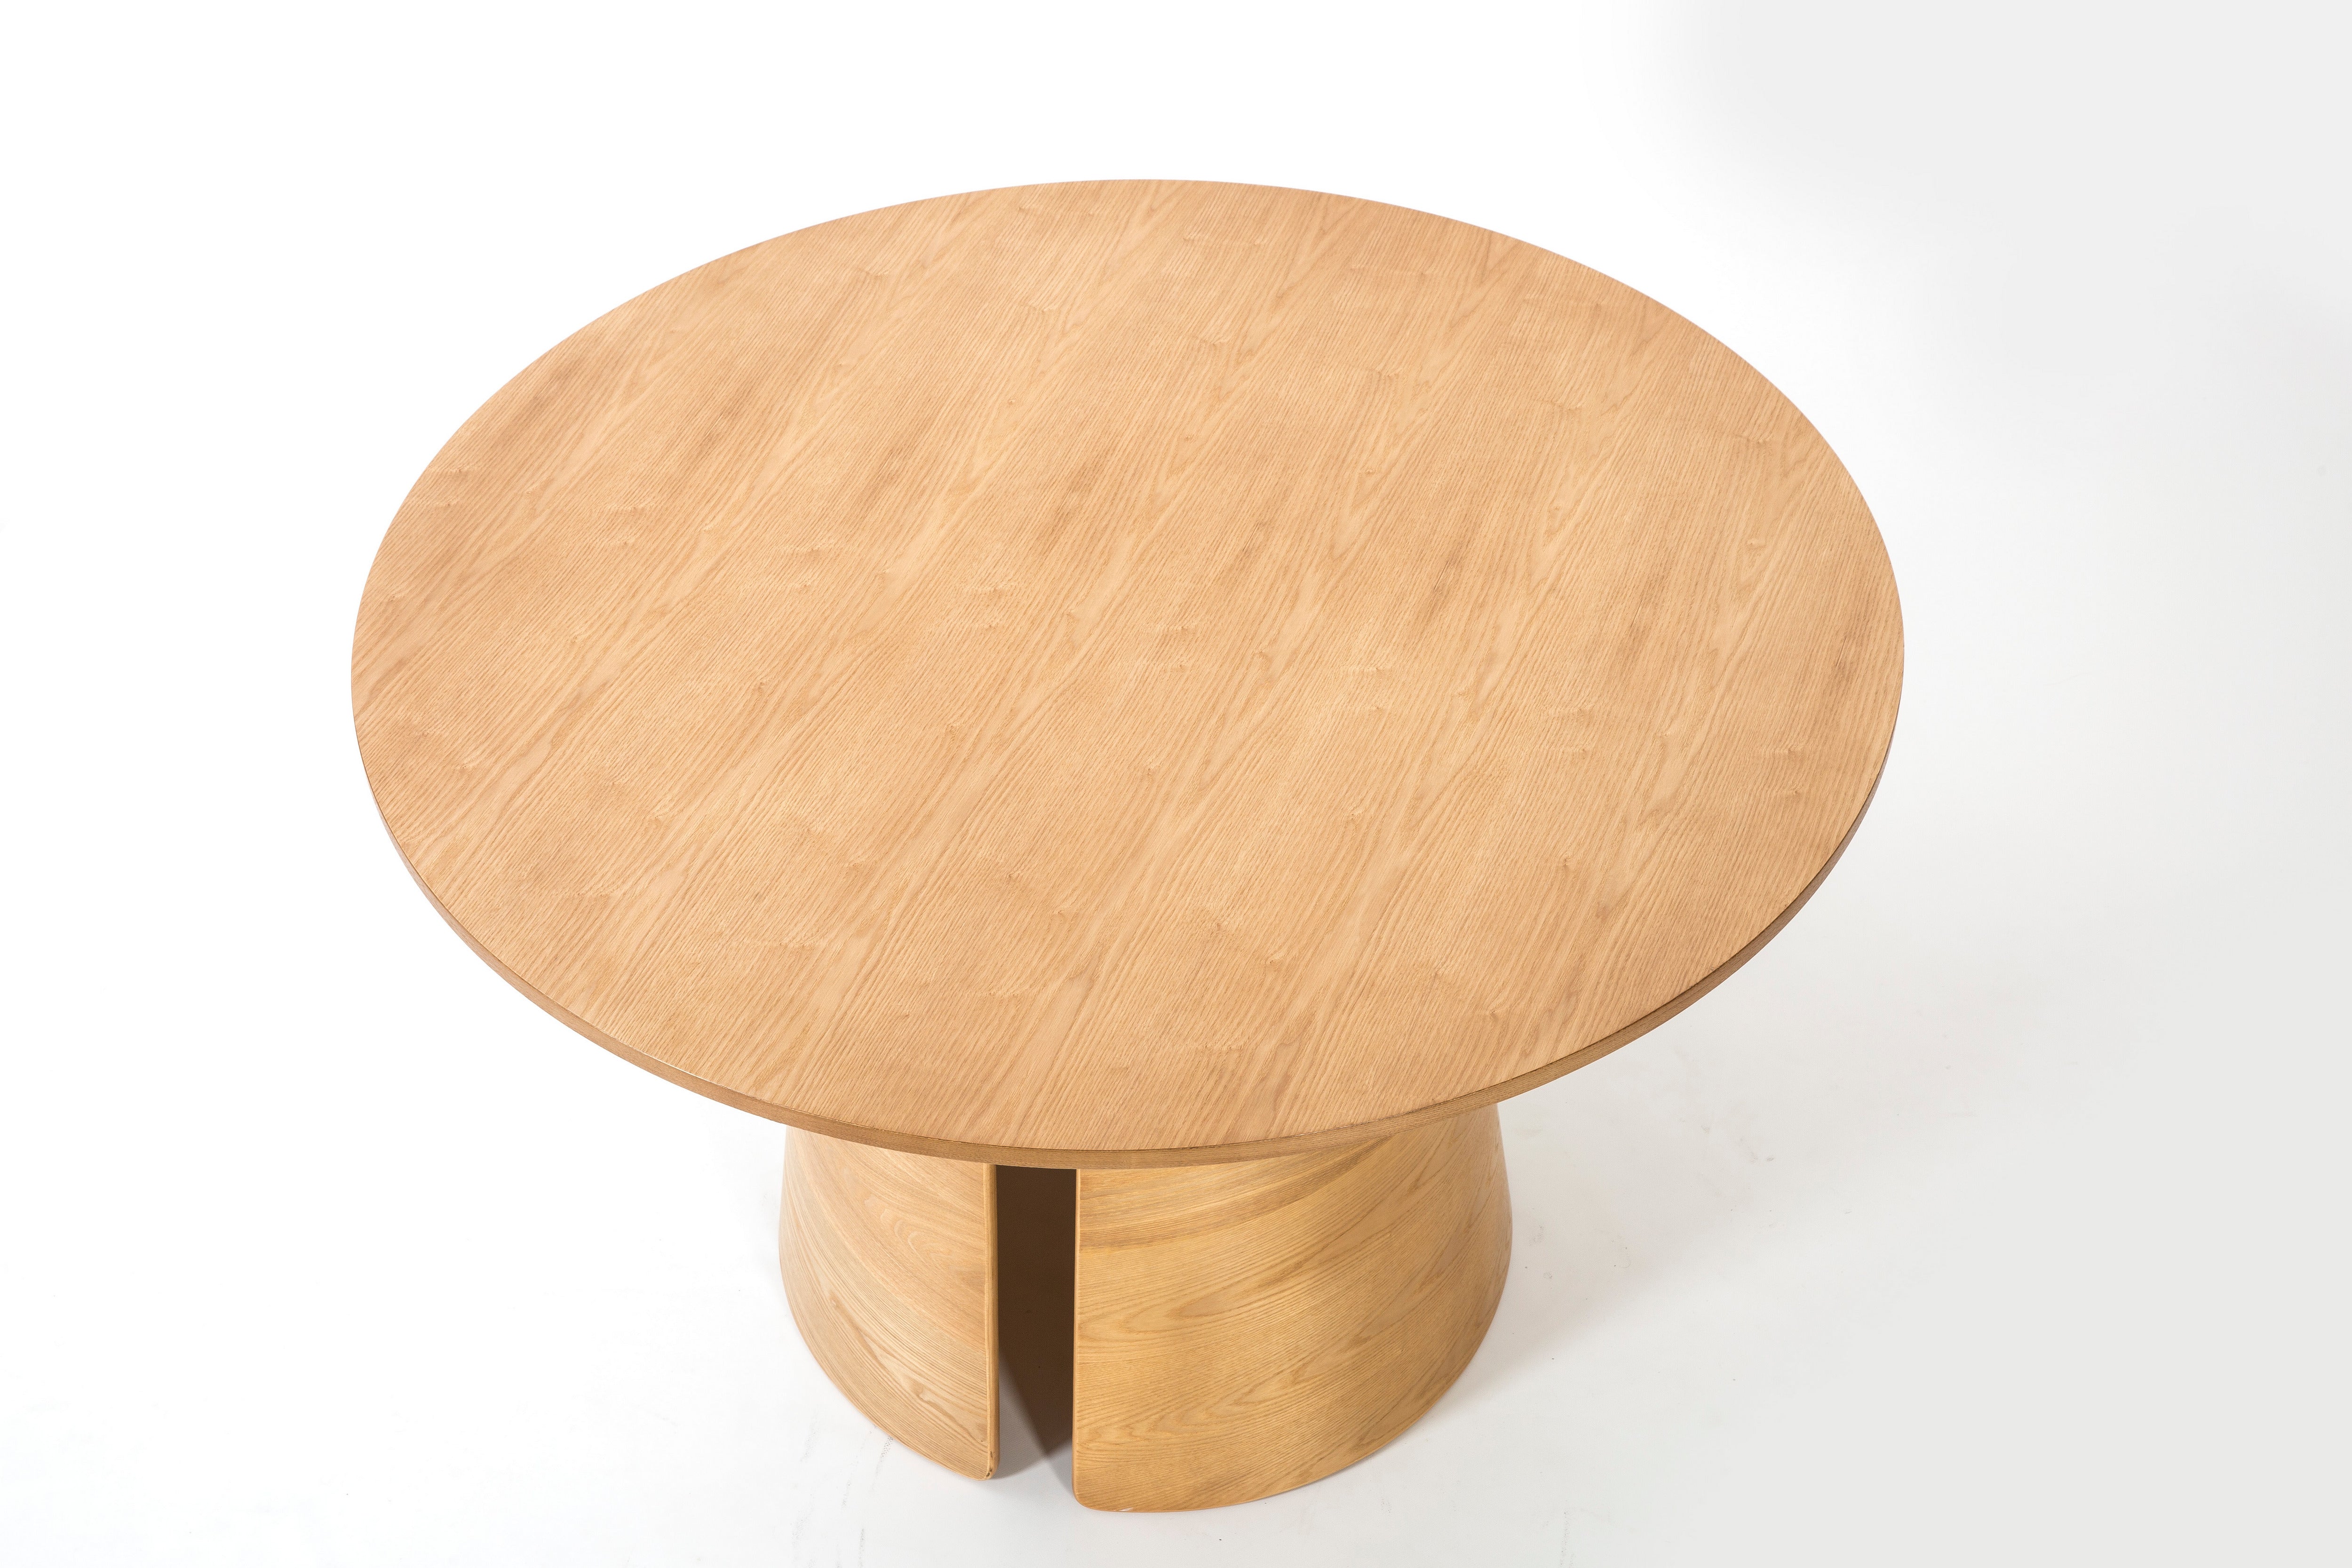 CEP wooden round table